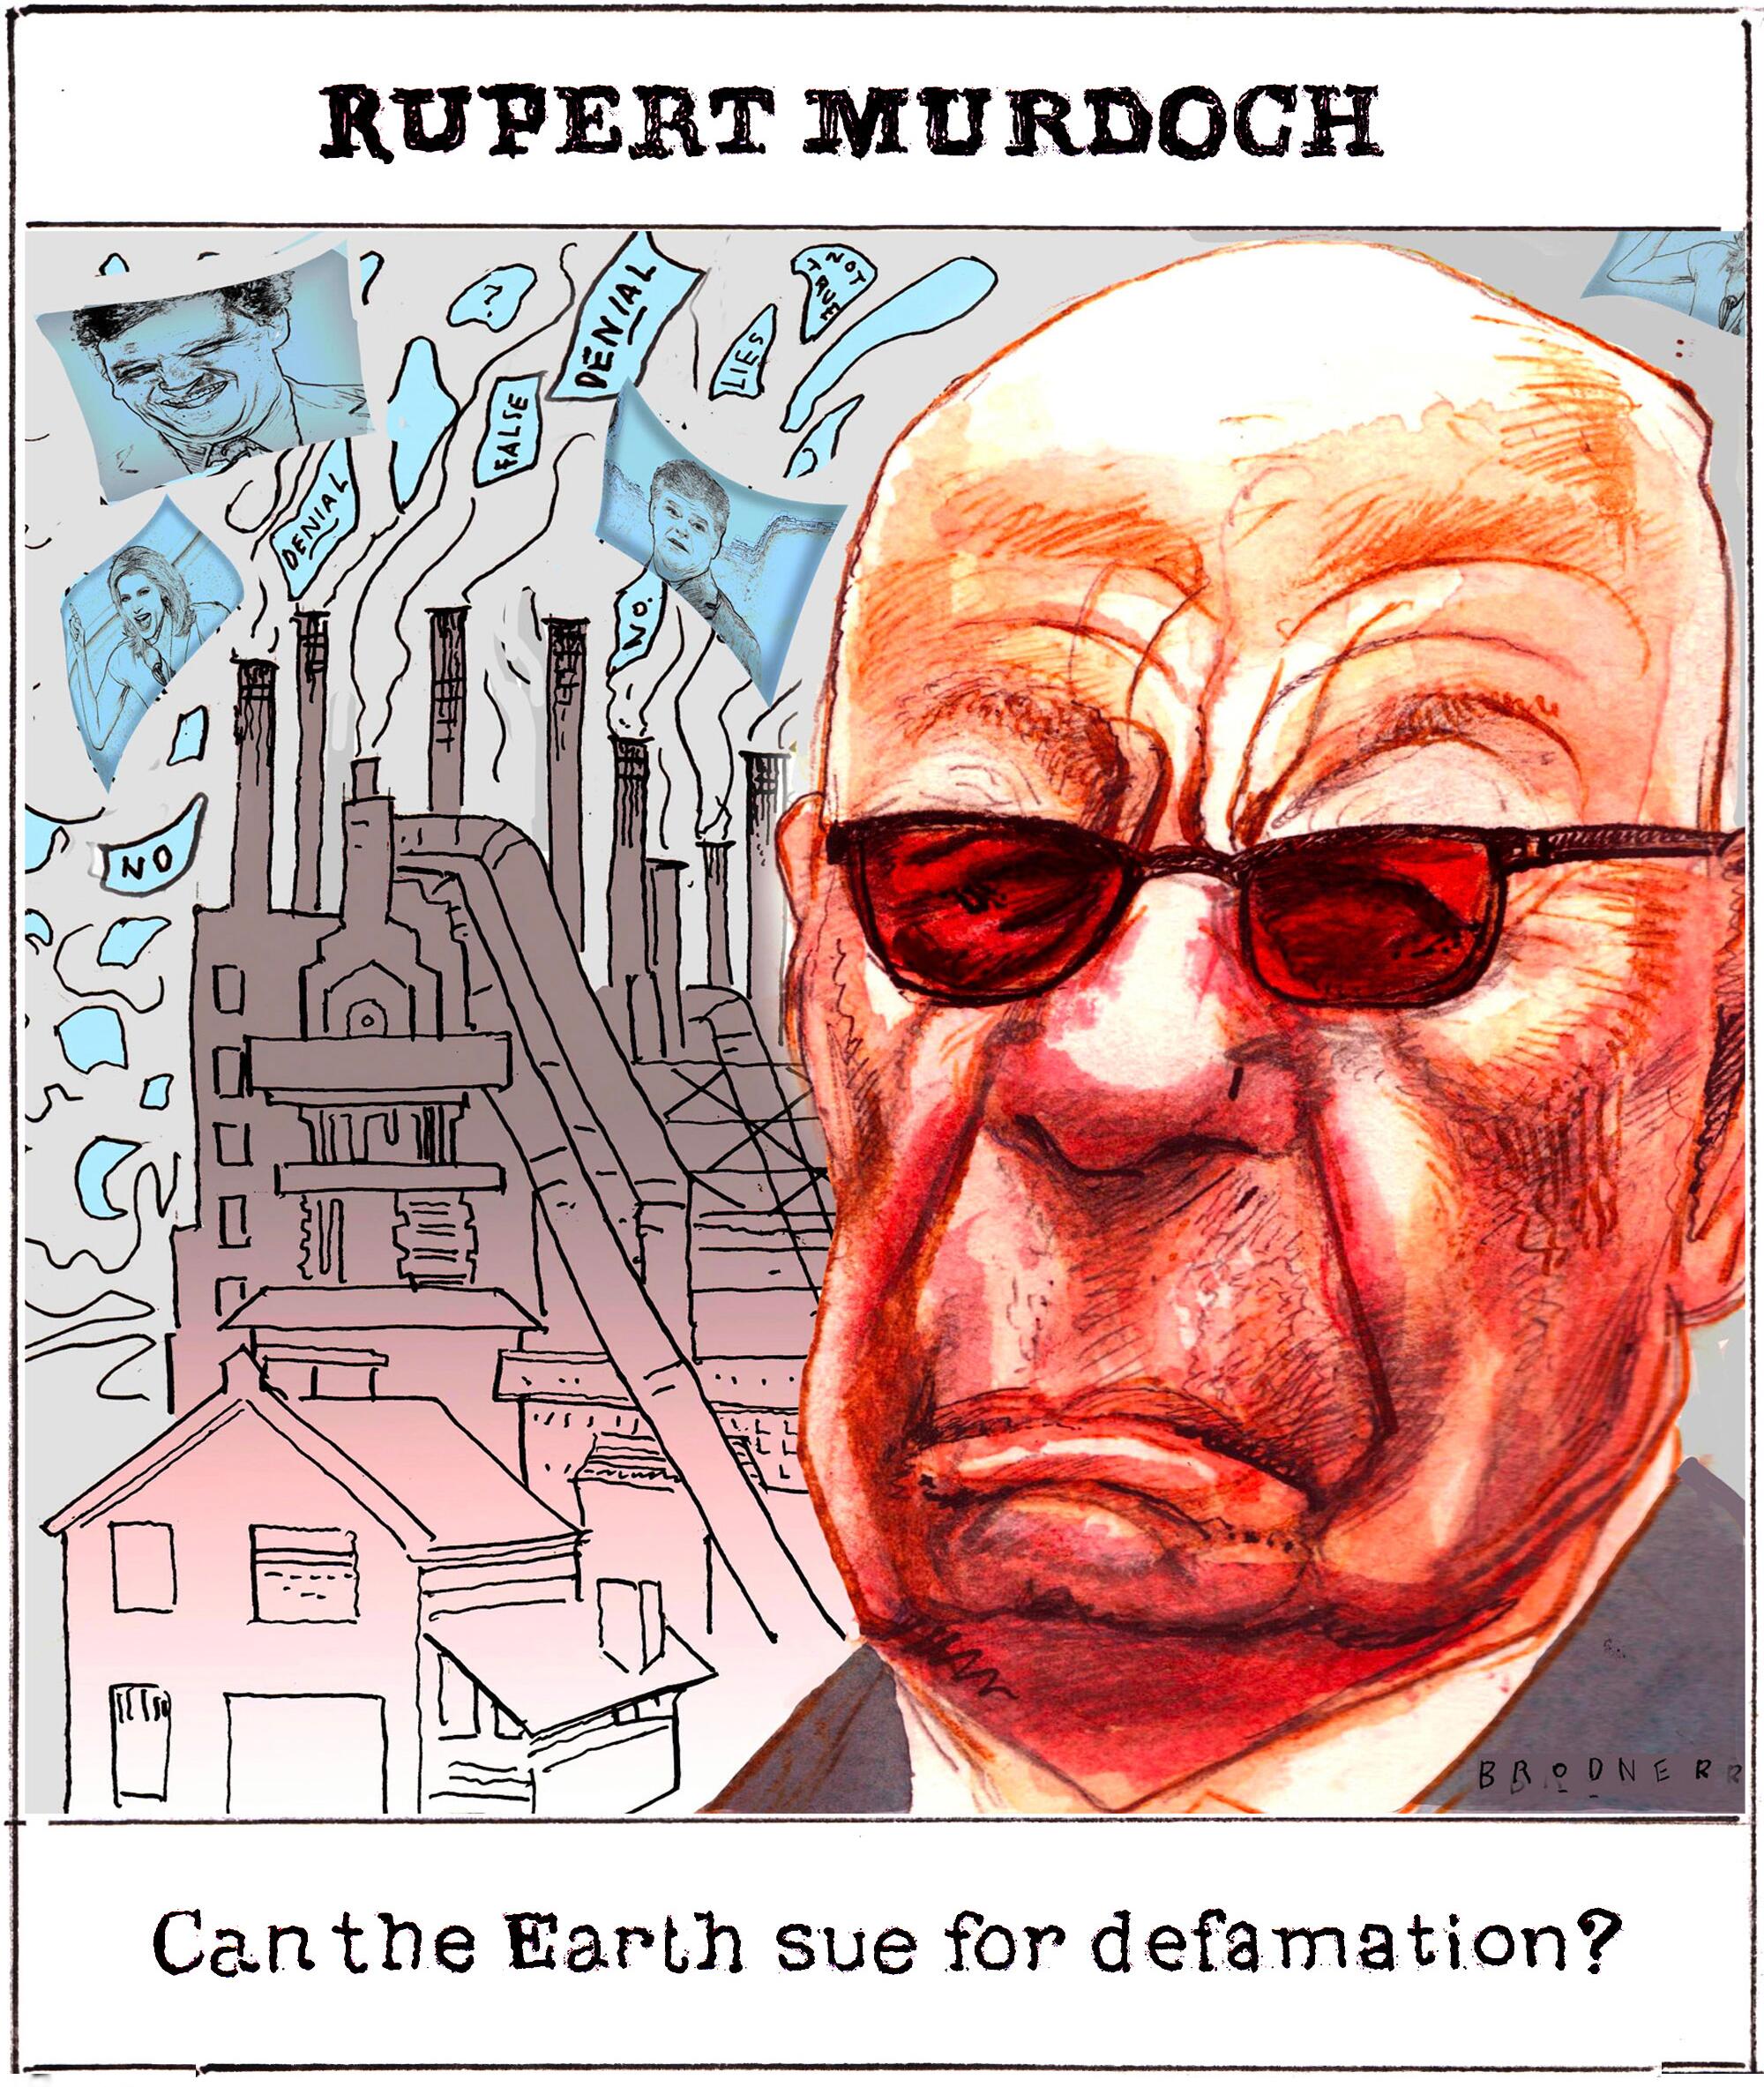 Rupert Murdoch. Can the Earth sue for defamation?